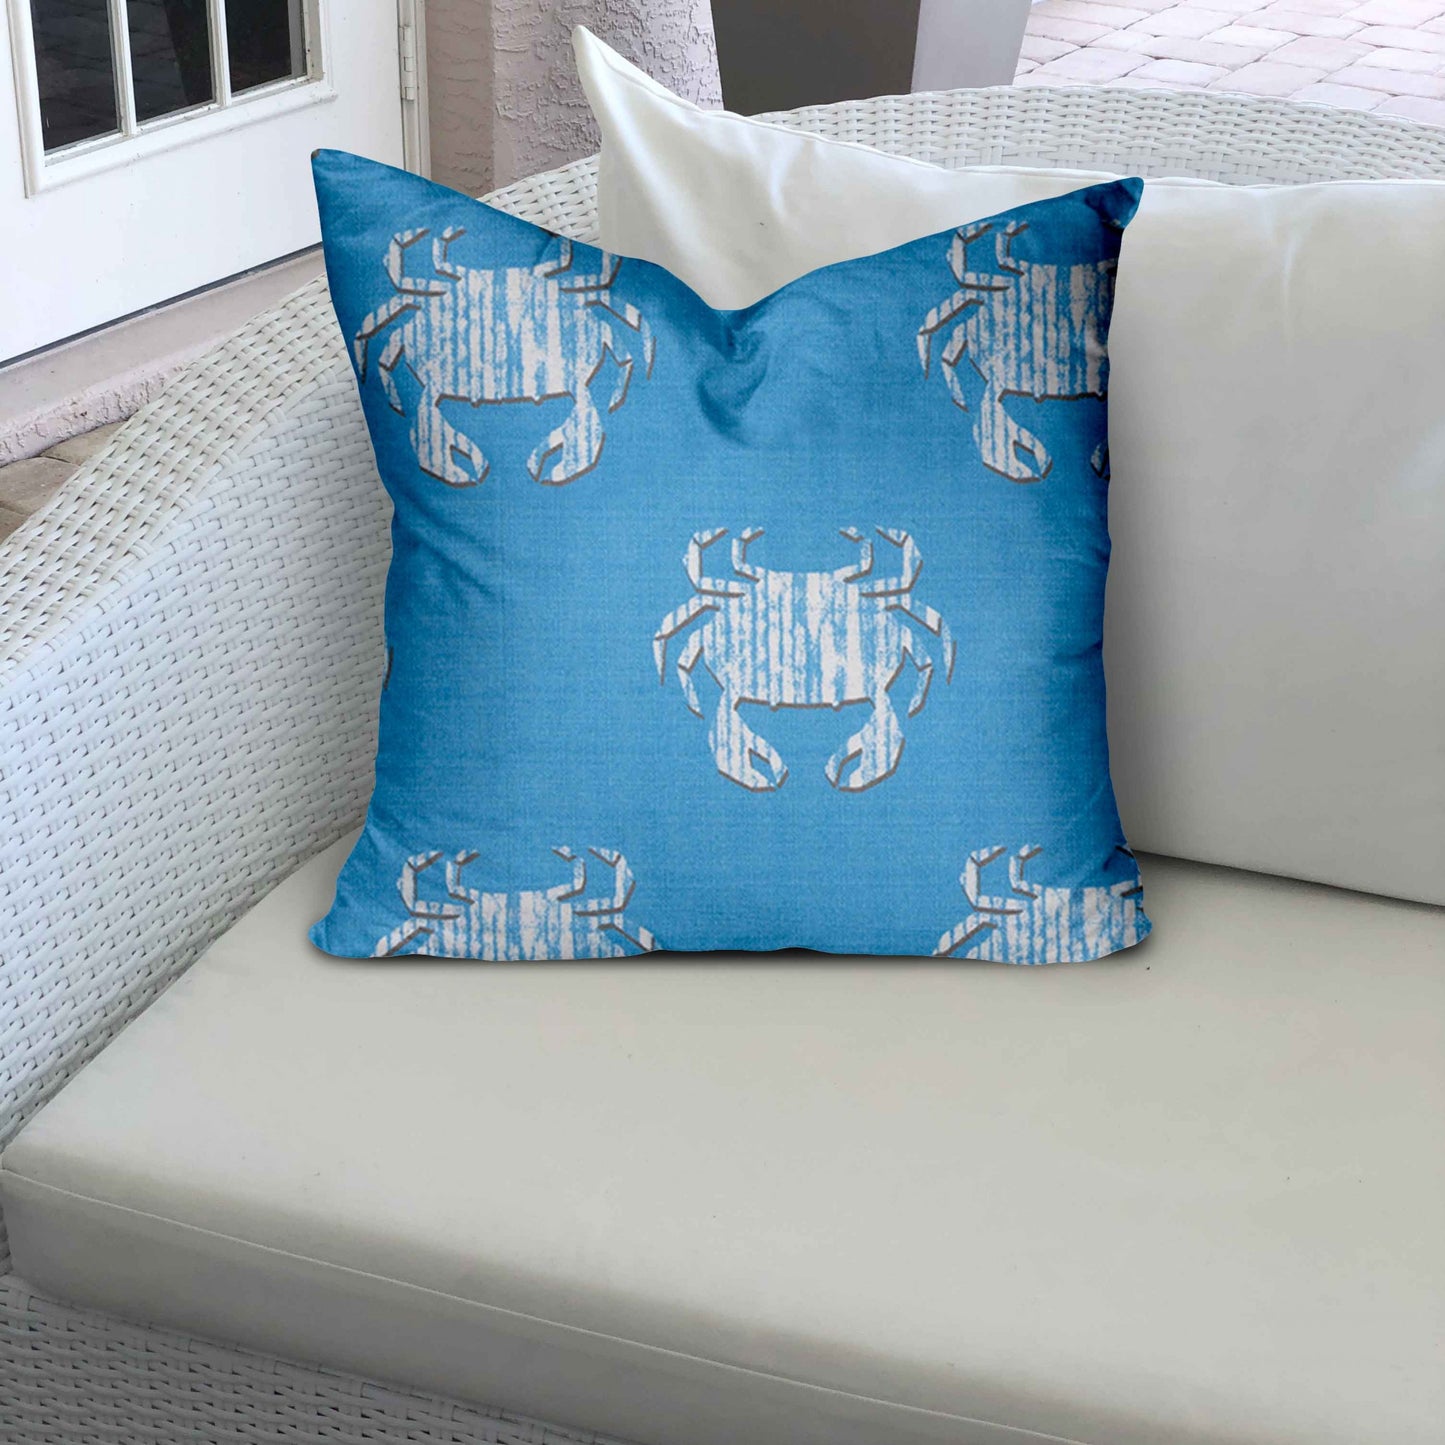 24" X 24" Blue And White Crab Zippered Coastal Throw Indoor Outdoor Pillow Cover